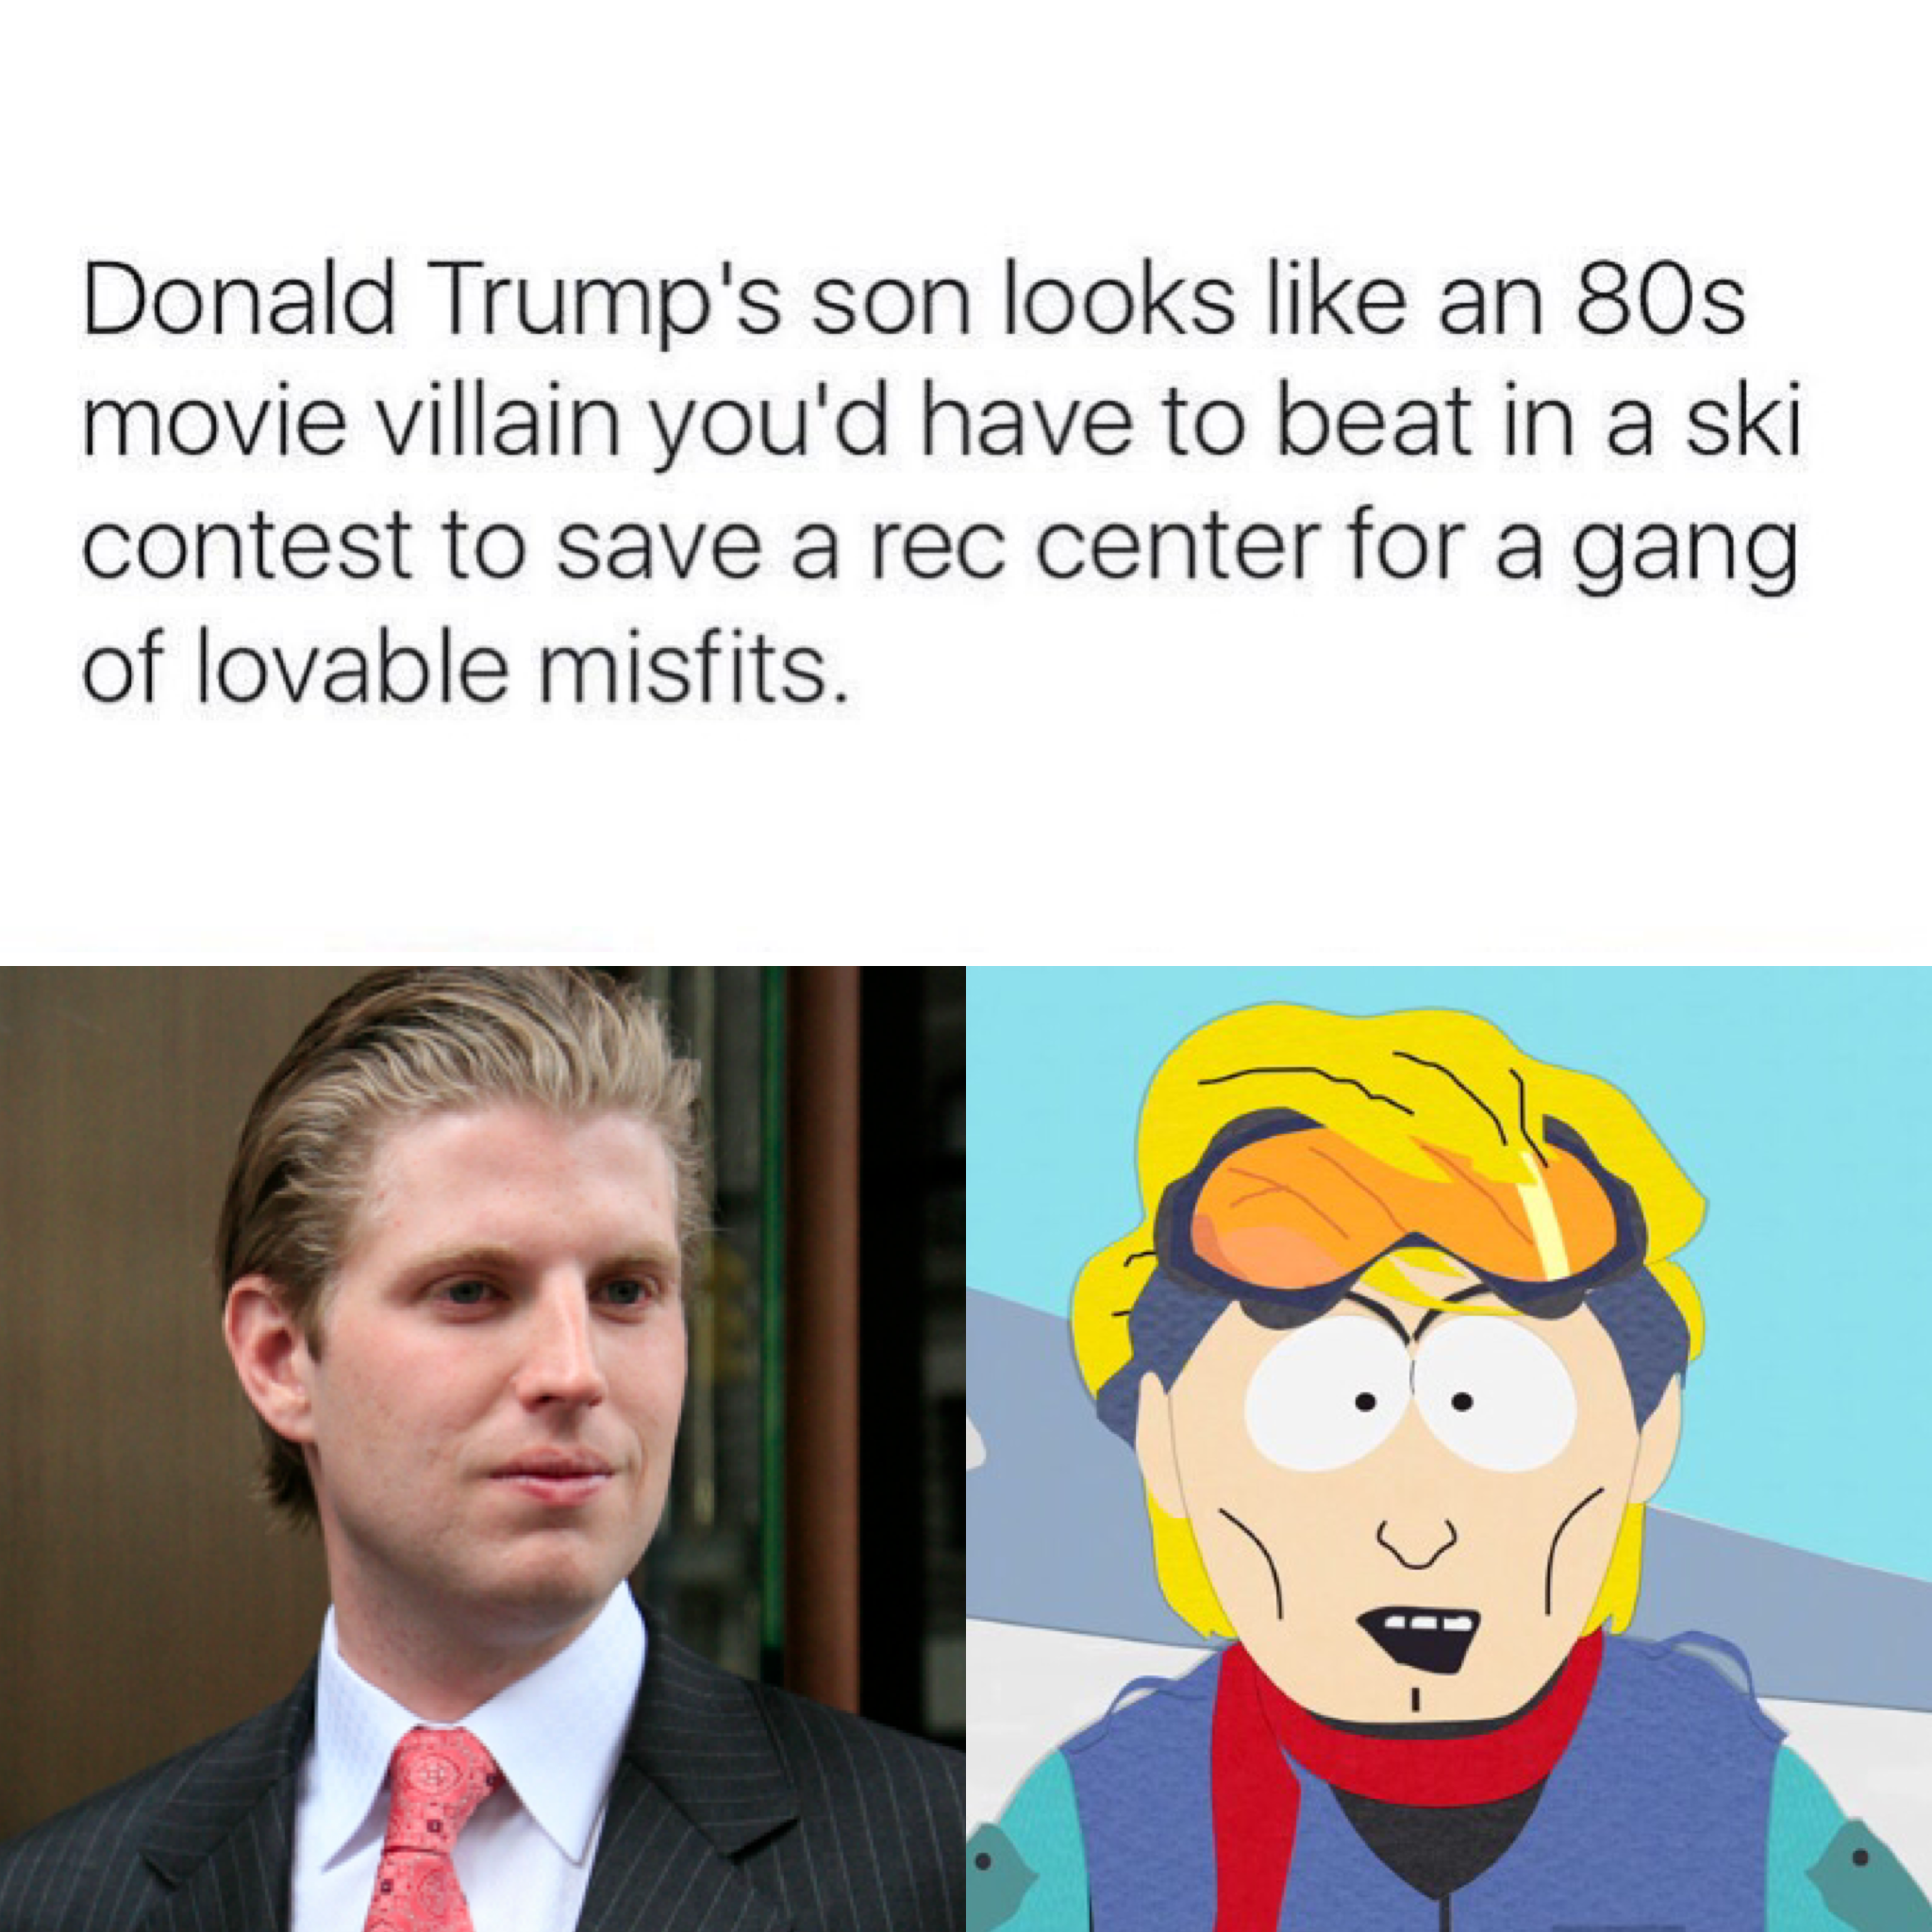 eric trump meme - Donald Trump's son looks an 80s movie villain you'd have to beat in a ski contest to save a rec center for a gang of lovable misfits.